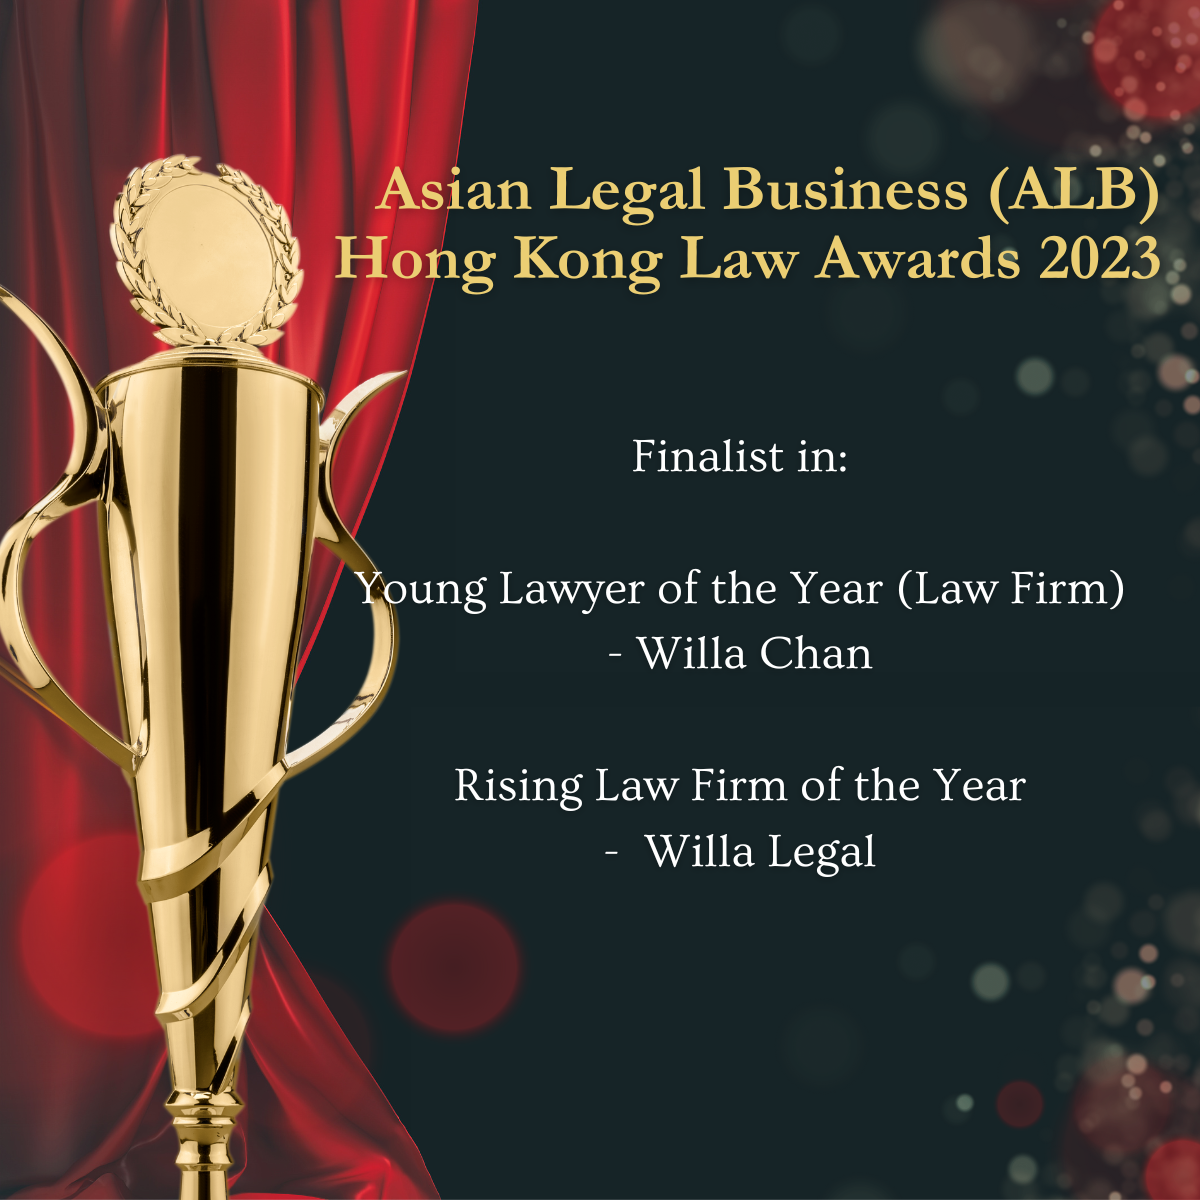 Willa Legal has been nominated as finalists in two categories for the ALB Hong Kong Law Awards 2023